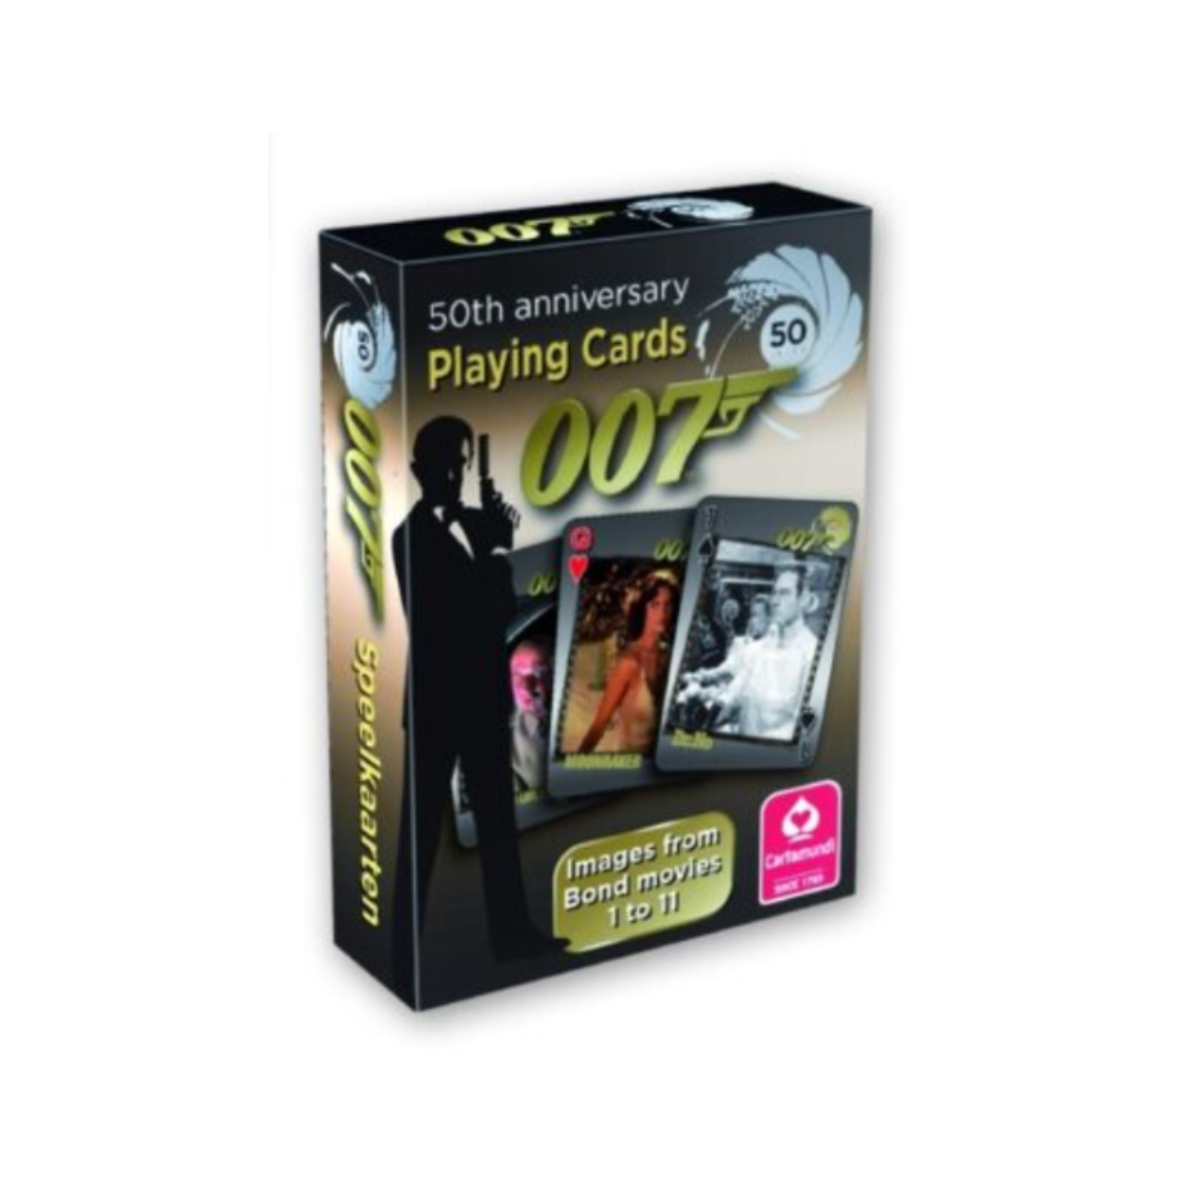 James Bond 50th Anniversary Playing Cards with Images from Bond Movies-Gold 1 To 11-Cartamundi-Ace Cards &amp; Collectibles